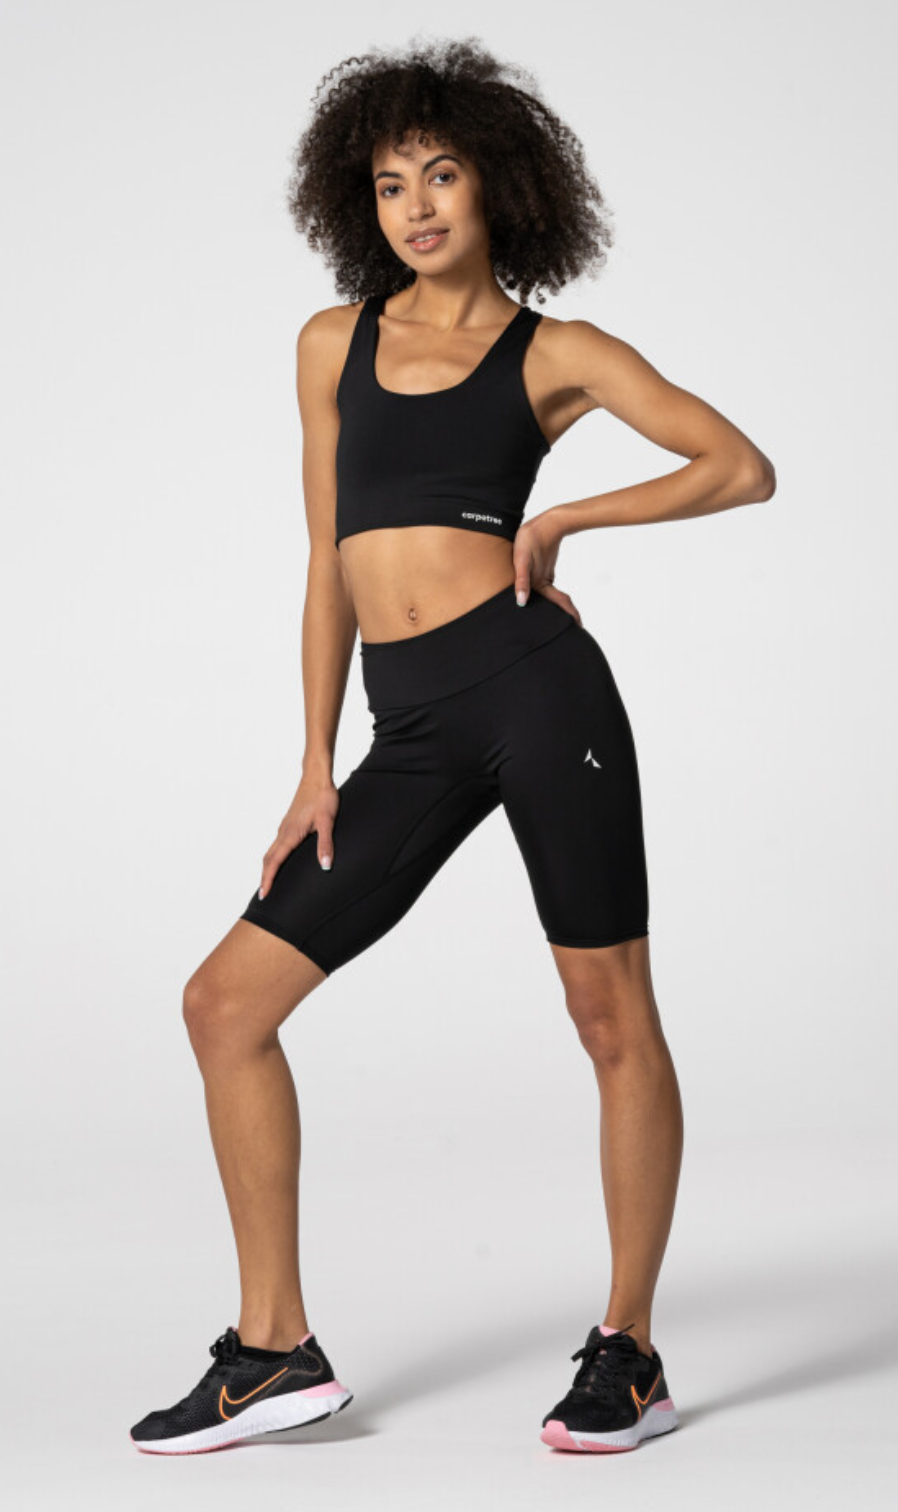 Carpatree Spark Biker Shorts - Black semi seamless biker sports with a high deep waistband and gusset. Made of soft and strong quick-drying breathable fabric, letting you train effectively and comfortably.